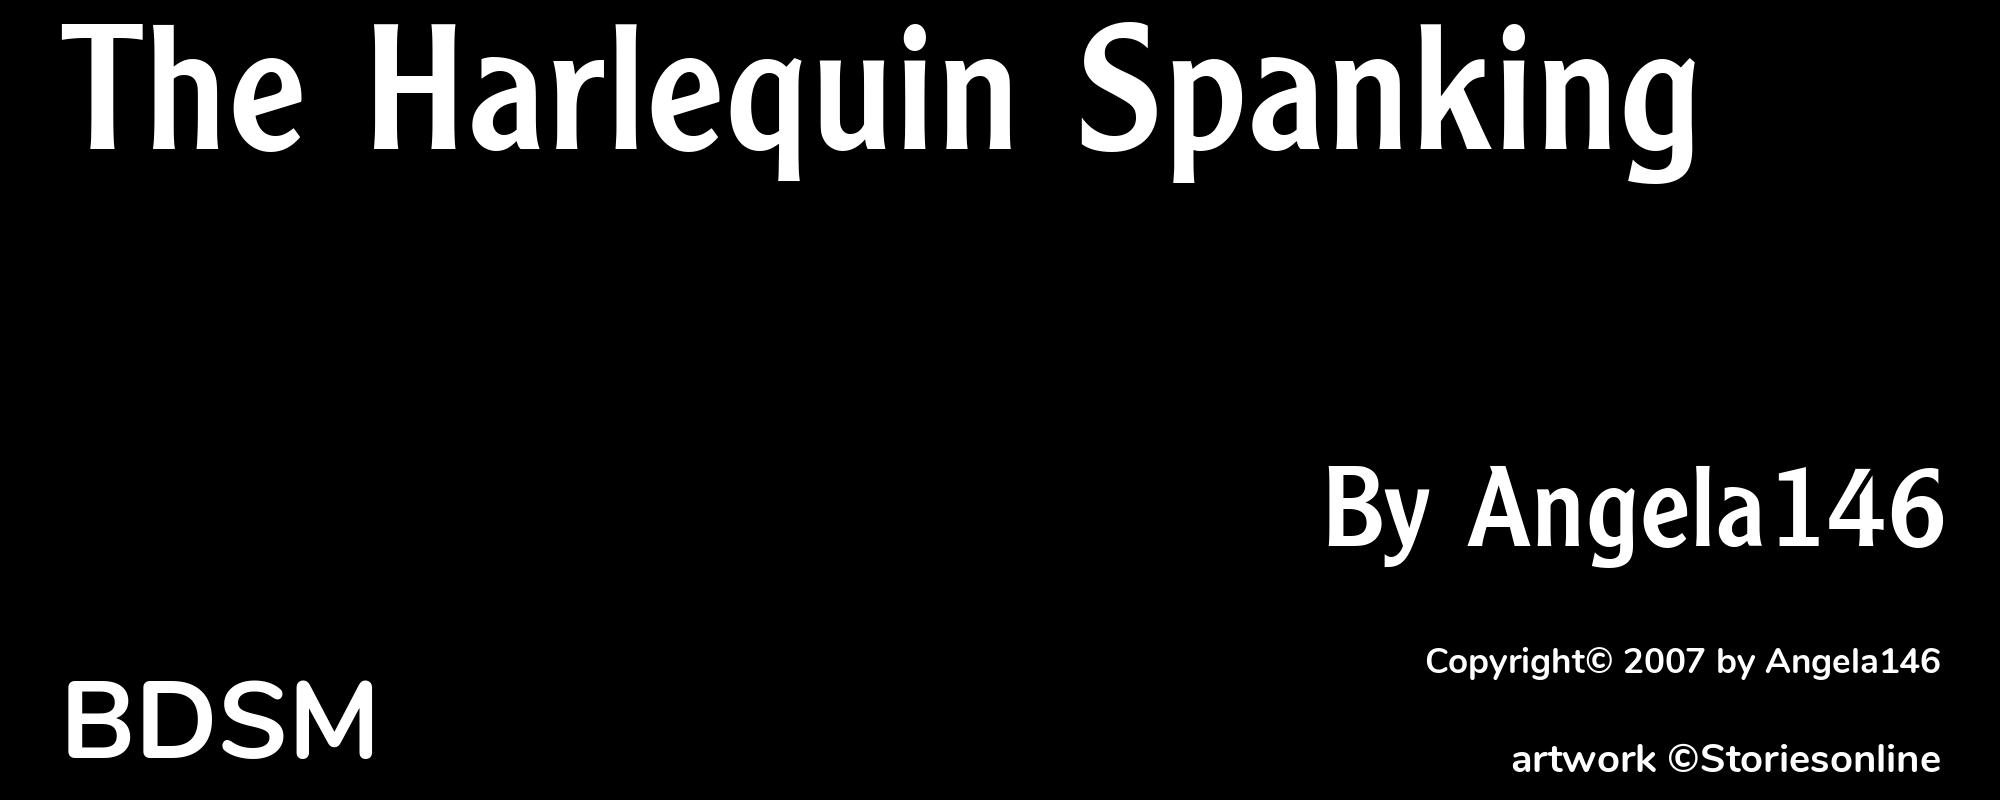 The Harlequin Spanking - Cover